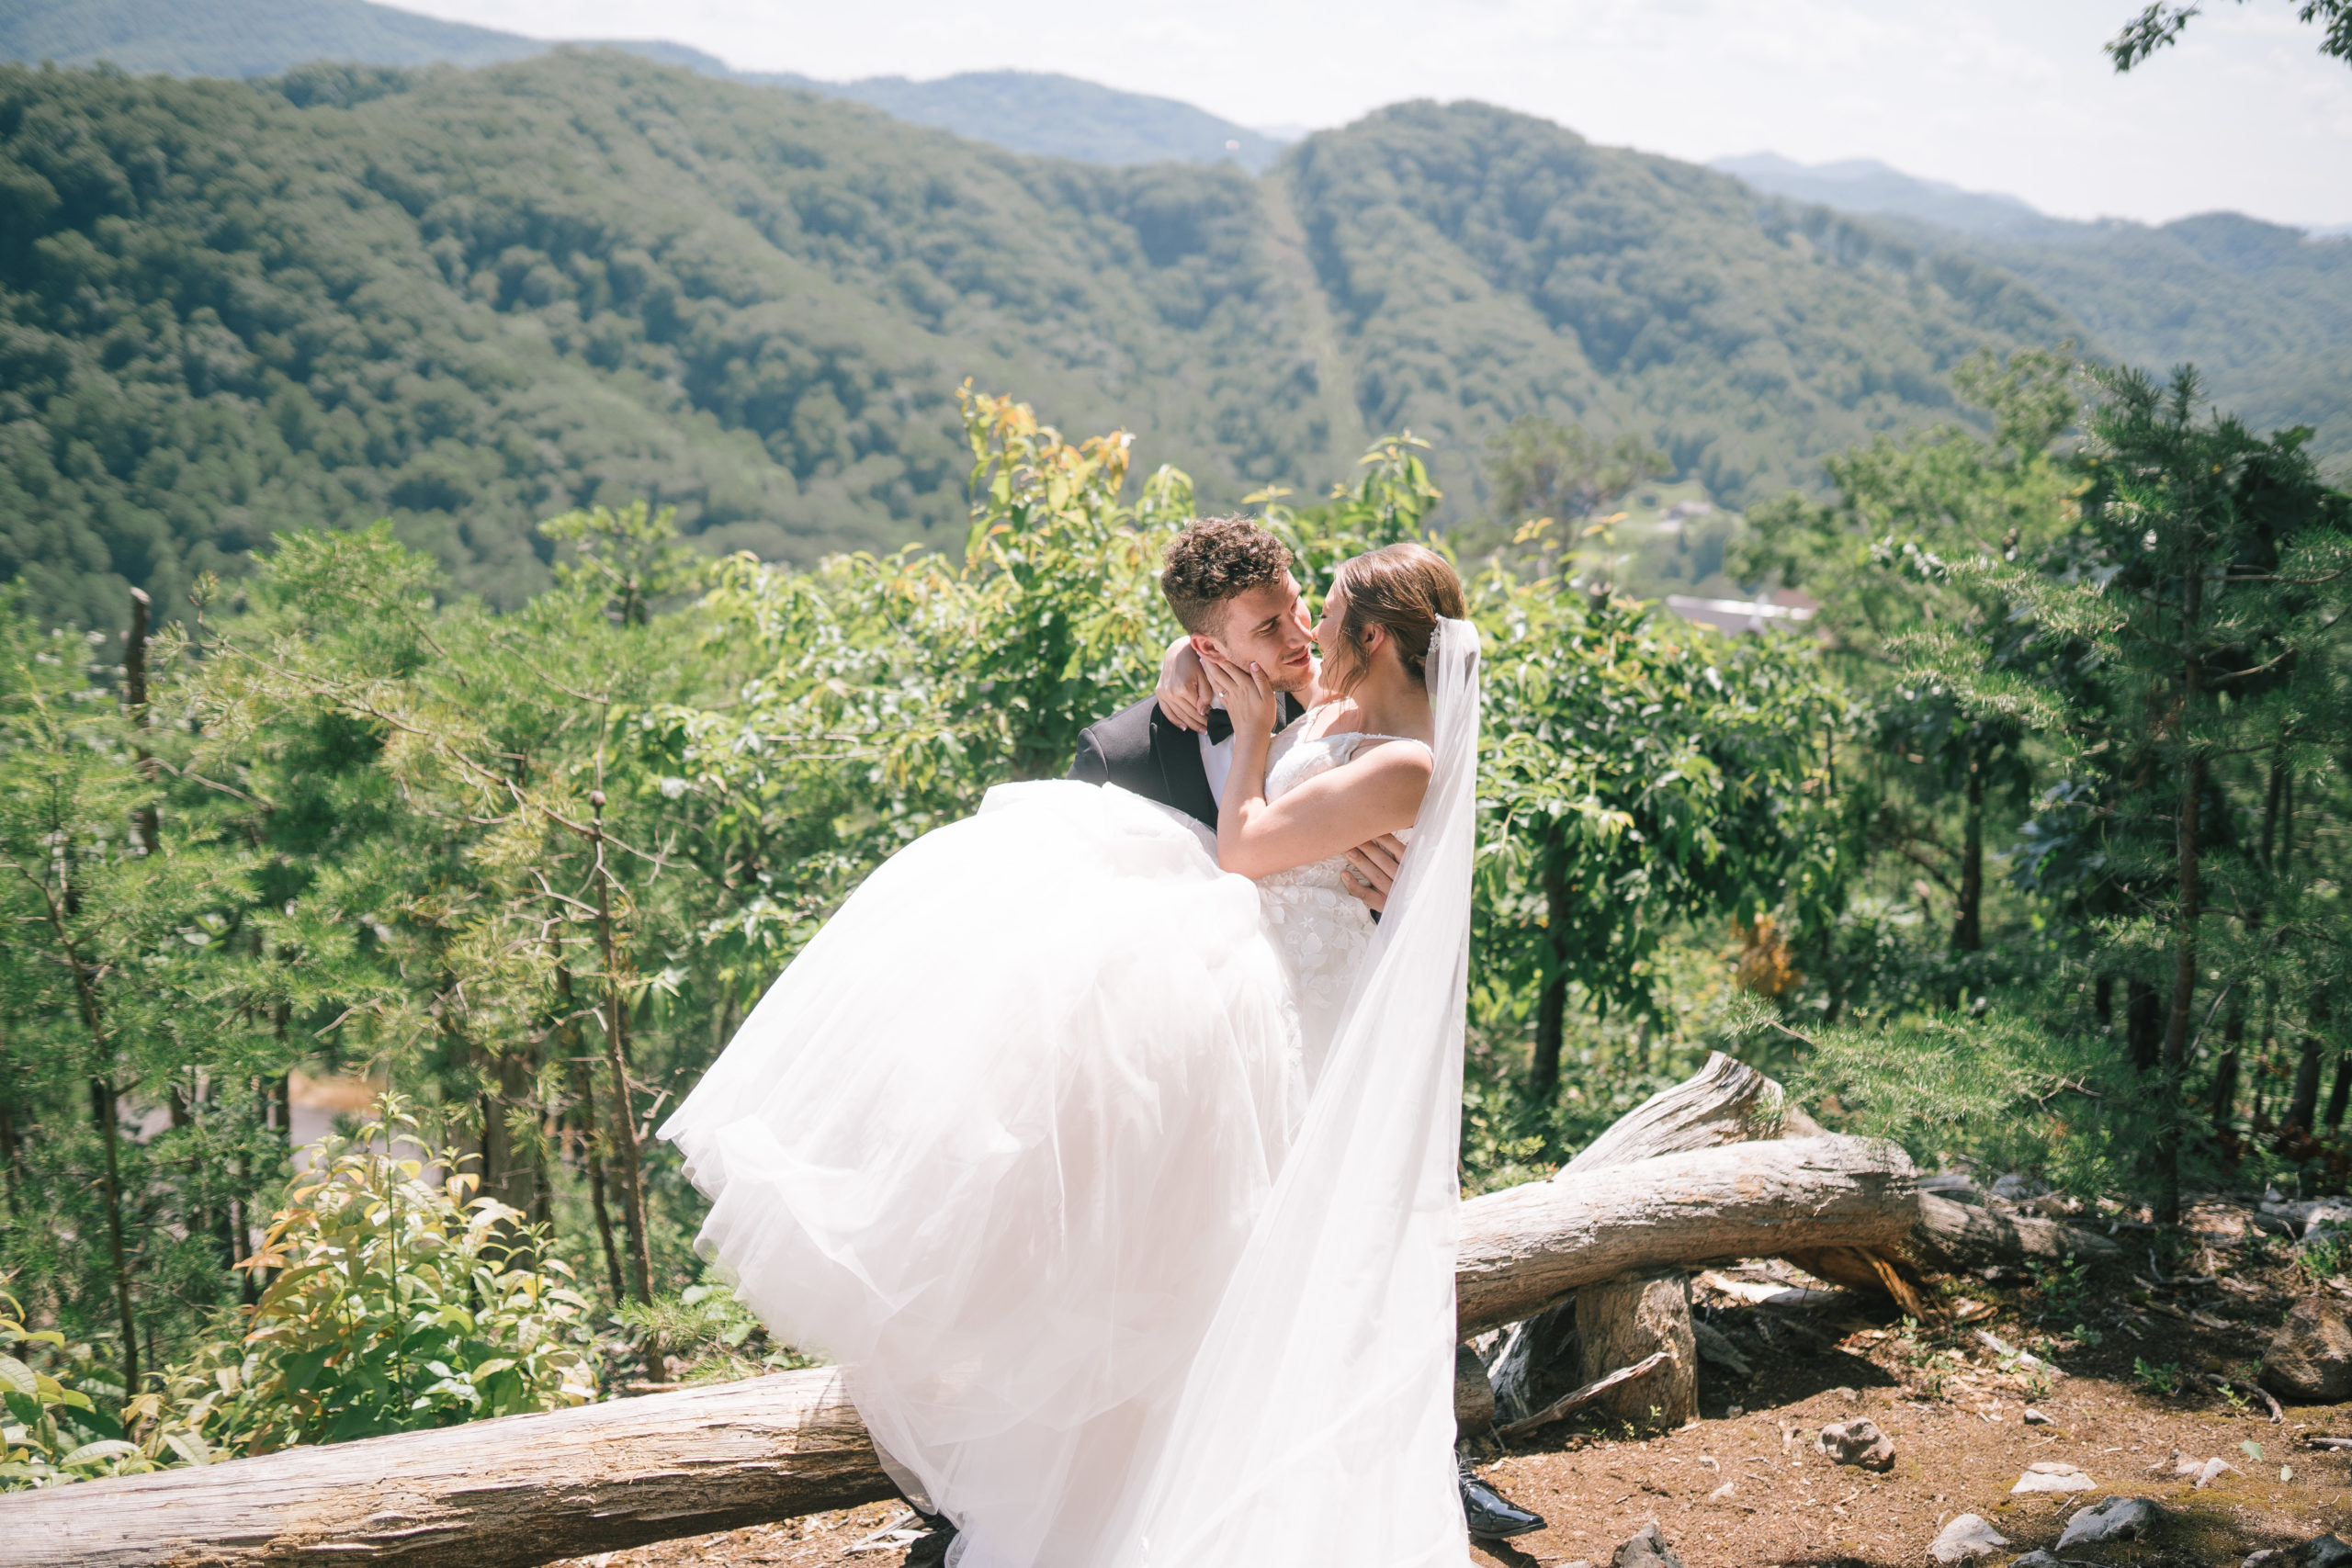 The Magnolia wedding venue in Tennessee with groom carrying his bride with the Smoky Mountains behind them for thier outdoor summer wedding